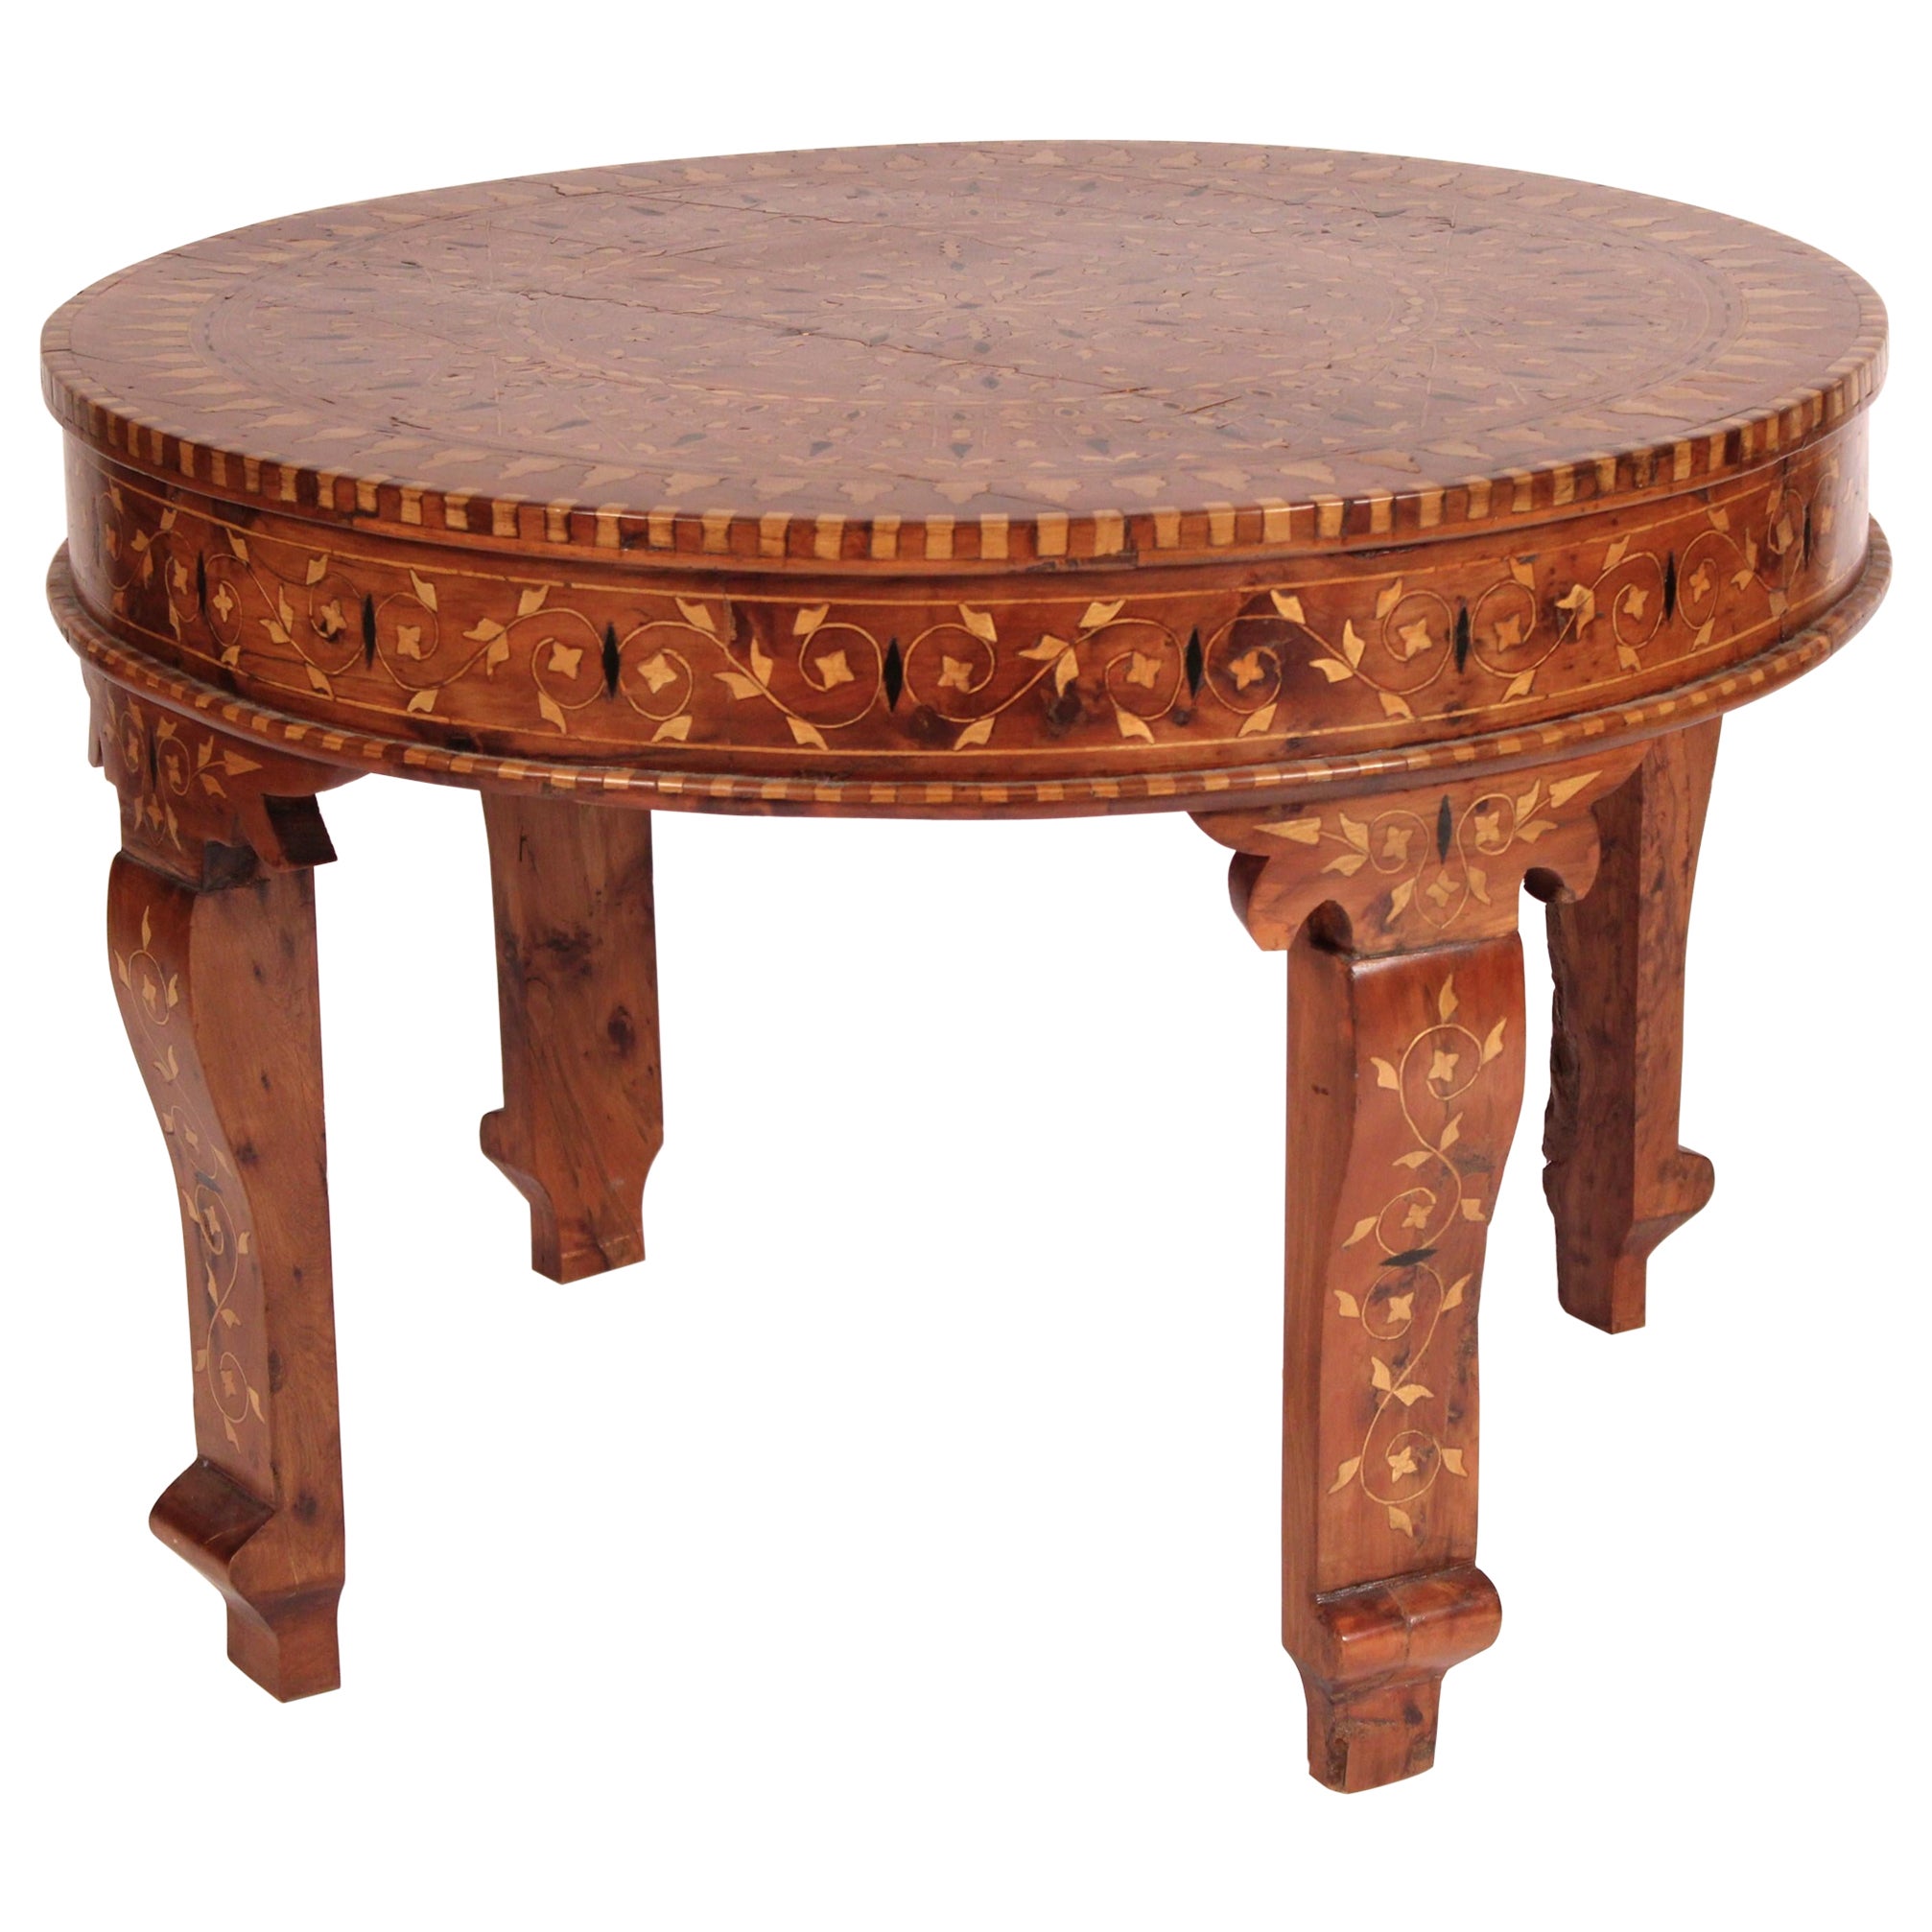 Middle Eastern Inlaid Round Coffee table For Sale